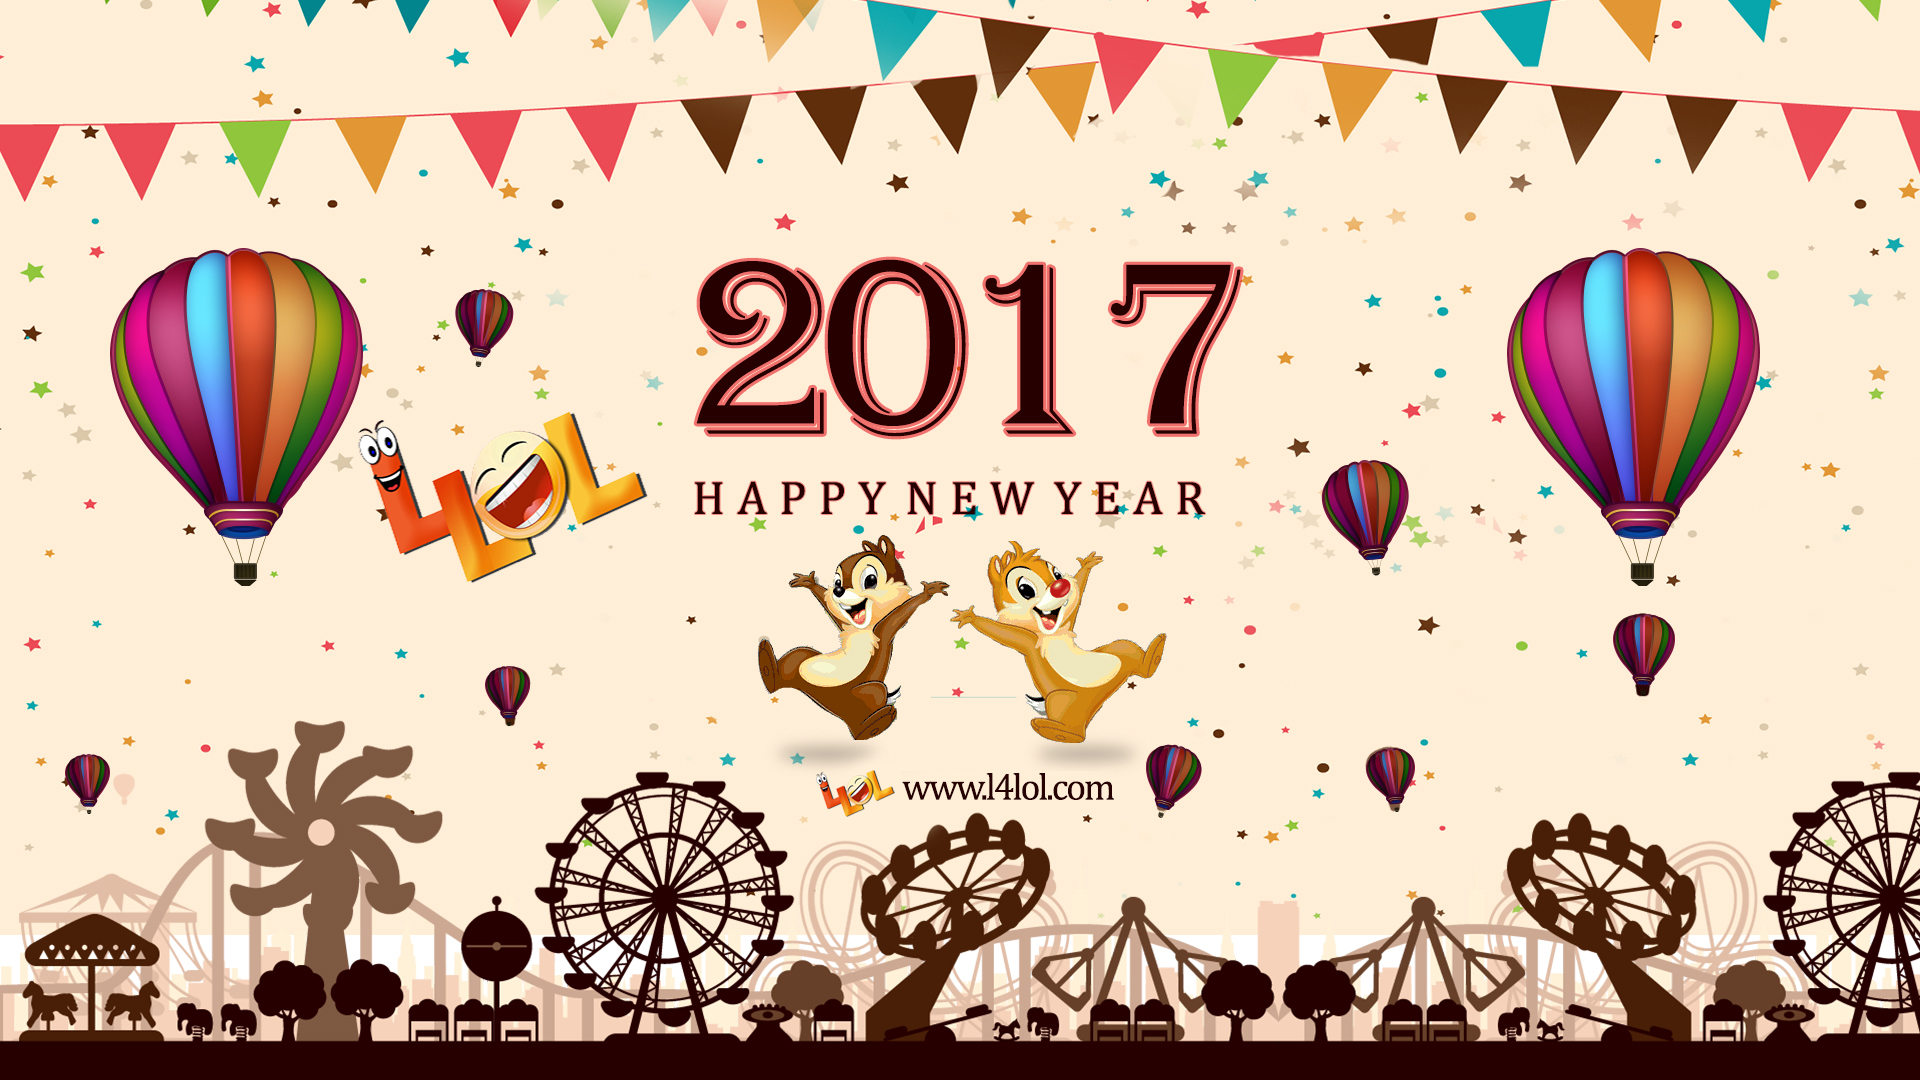 High Resolution Wallpaper | New Year 2017 1920x1080 px